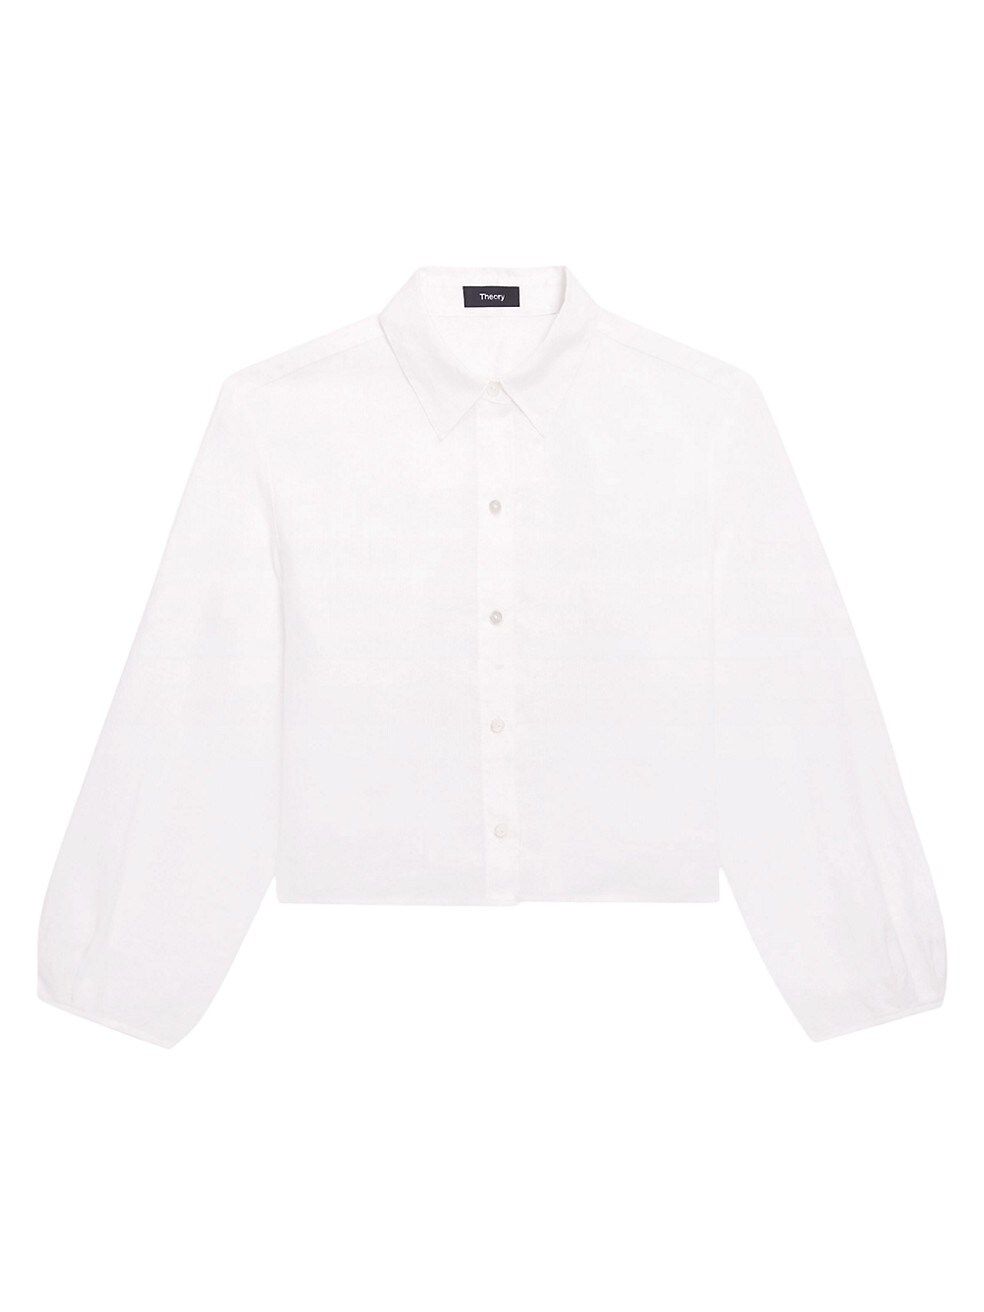 Theory Cropped Linen Shirt | Saks Fifth Avenue